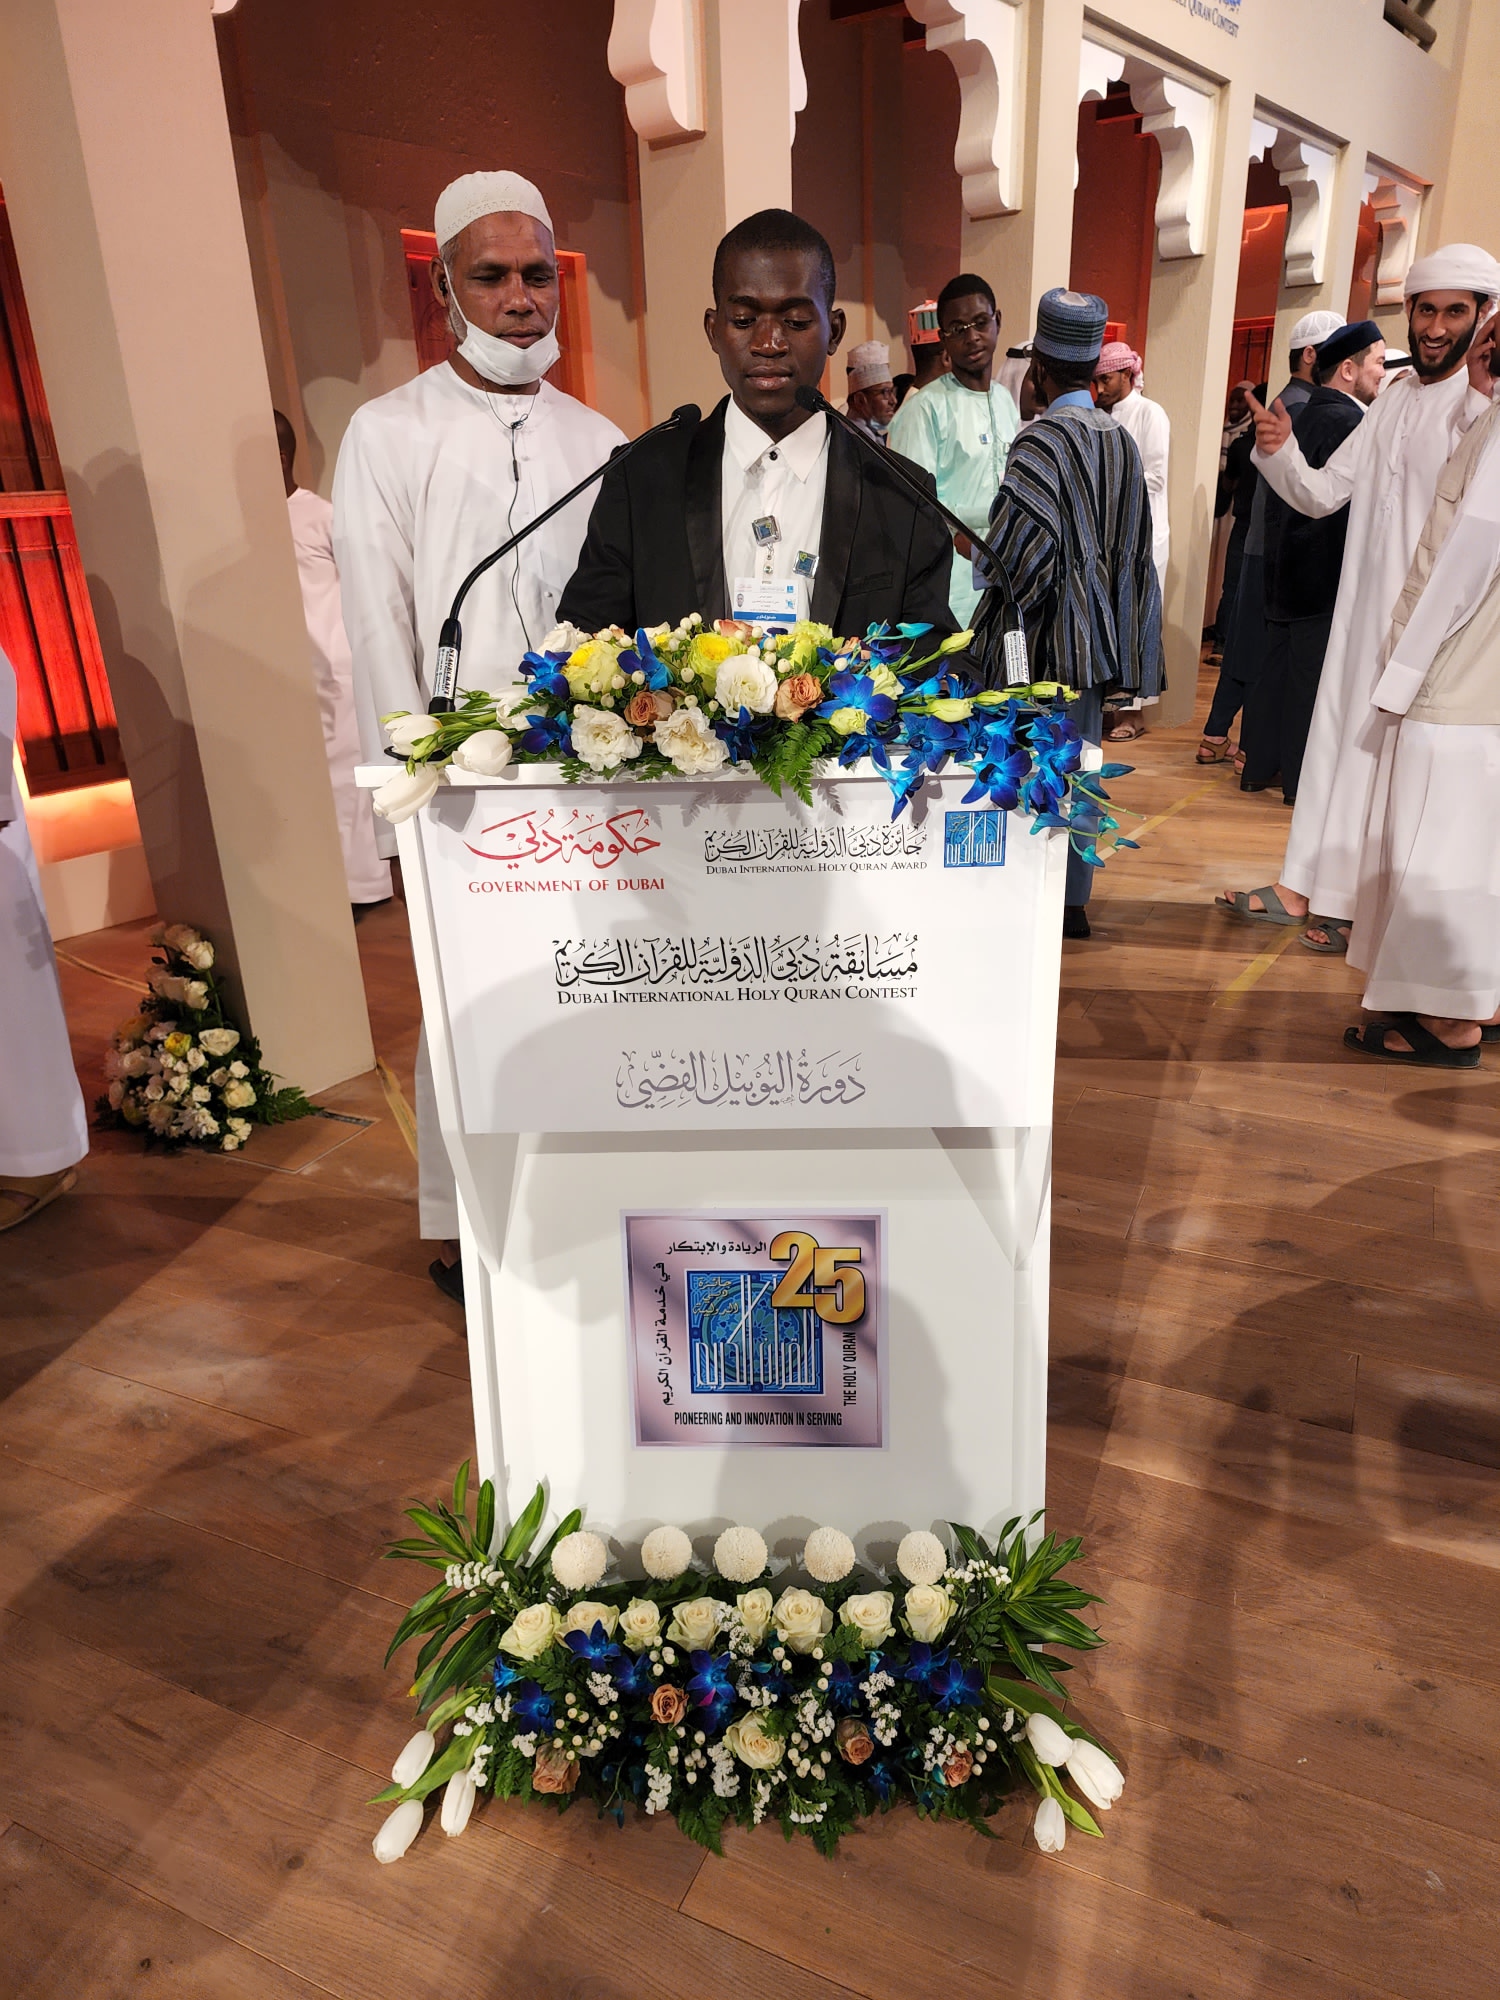 Malawi’s Quran Competition winner shines at World Quran Competition